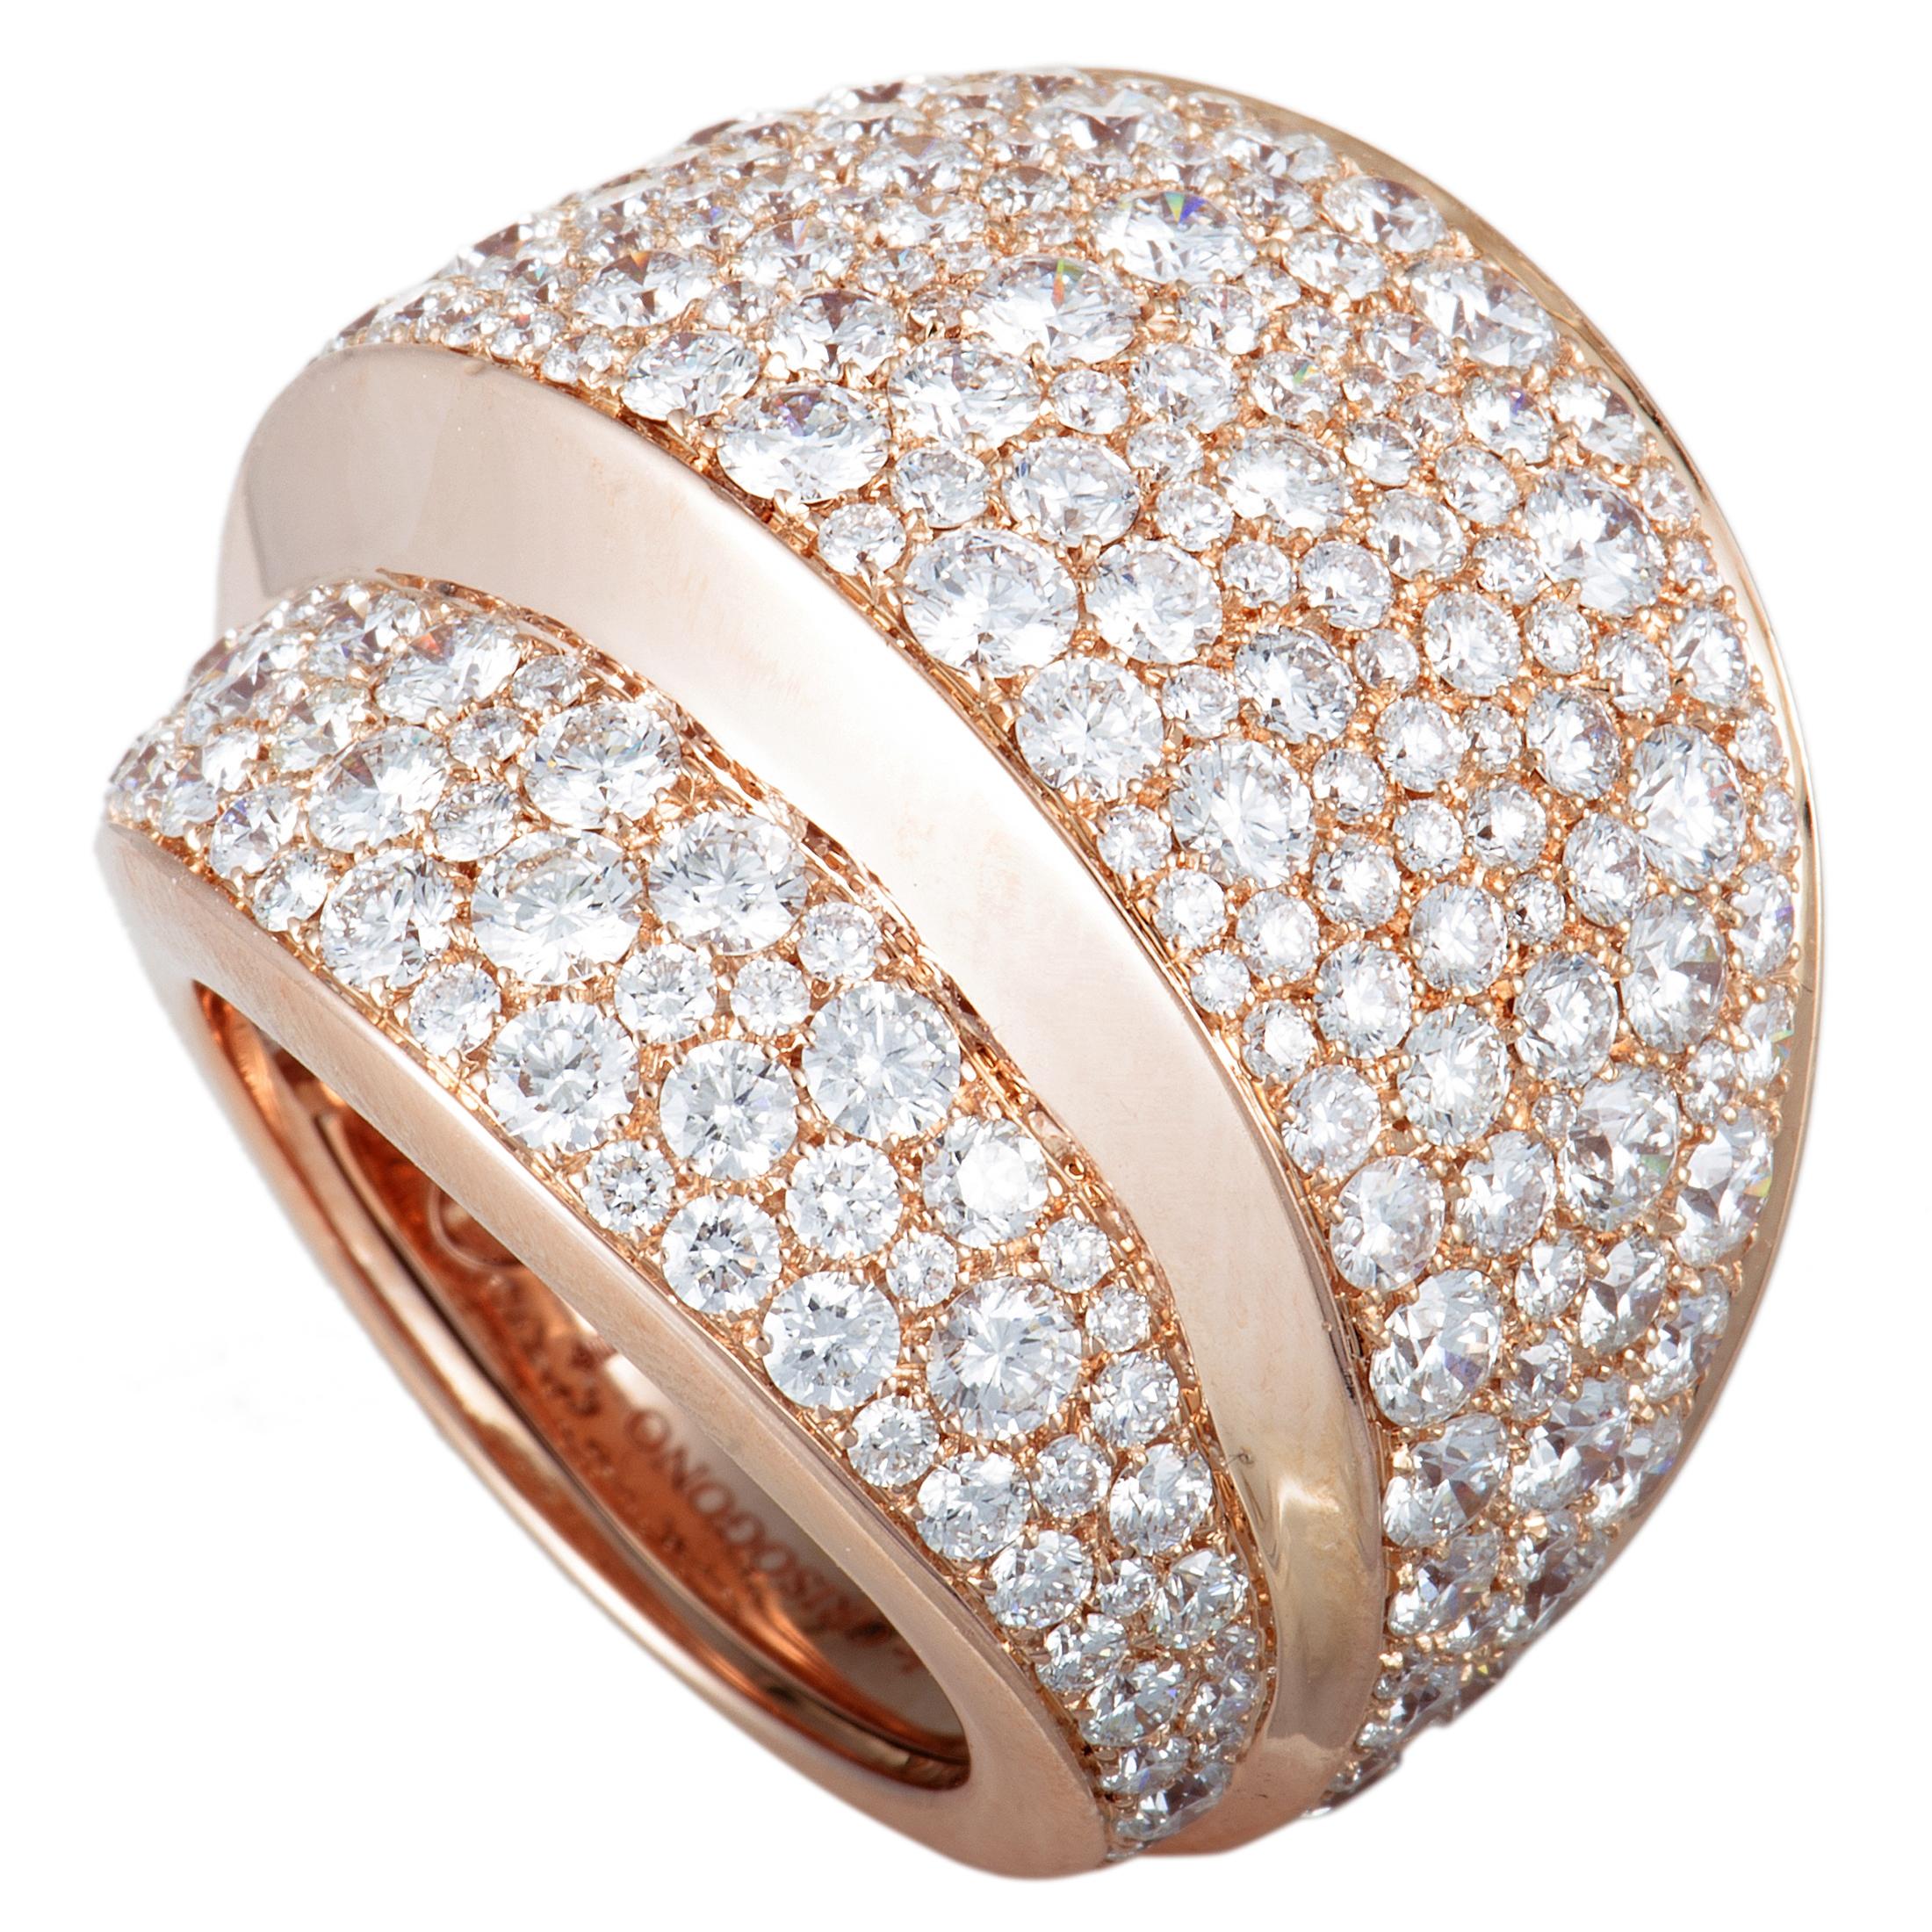 If you are looking for a jewelry piece that exudes the very essence of refined extravagance then this fabulous ring is a perfect choice. Wonderfully designed by de Grisogono, the ring is exquisitely crafted from enchantingly radiant 18K rose gold